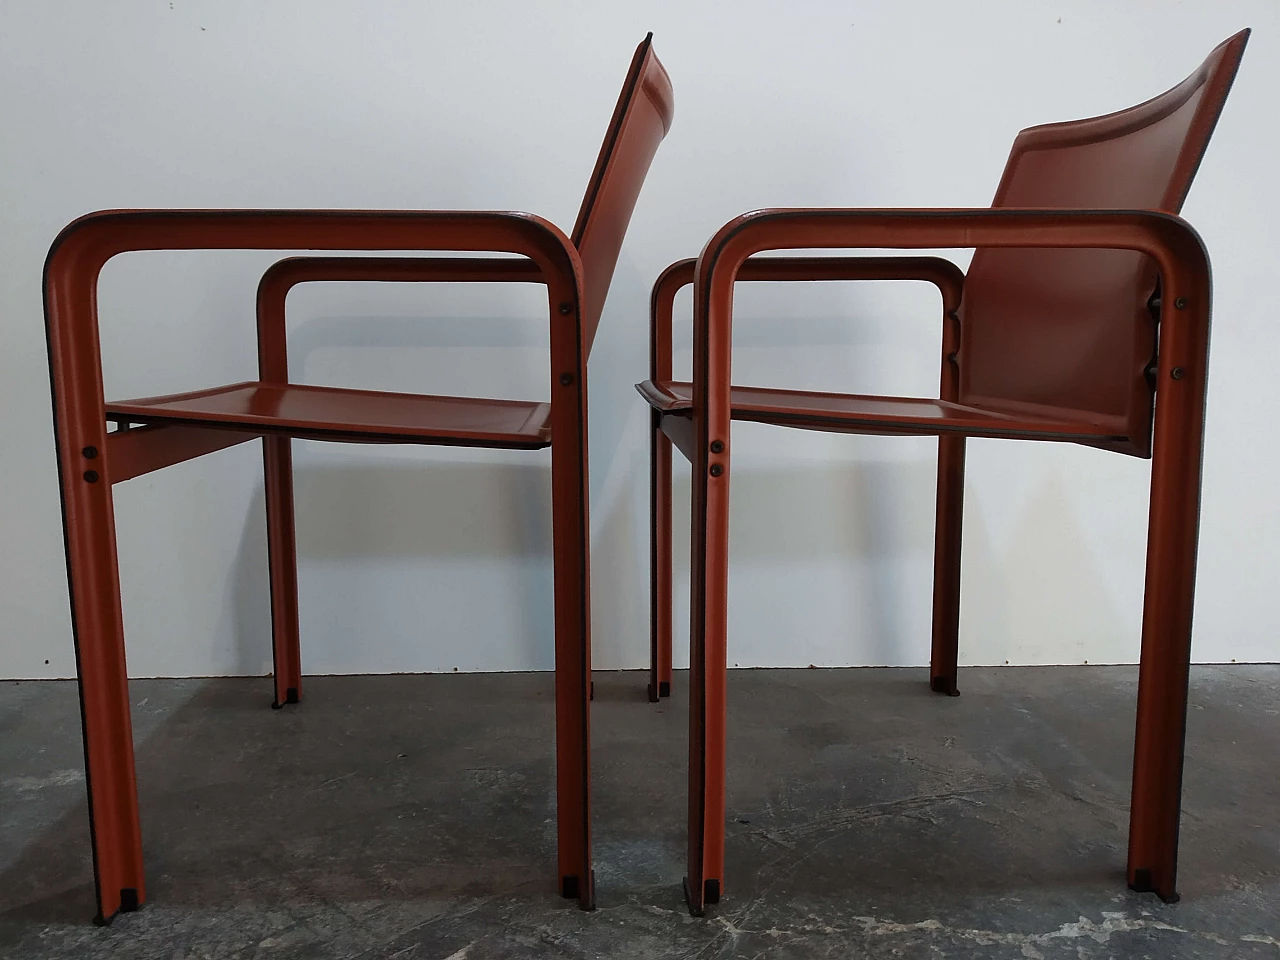 Pair of Golfo dei Poeti chairs by Toussaint & Angeloni manufactured by Matteo Grassi, 1980s 25